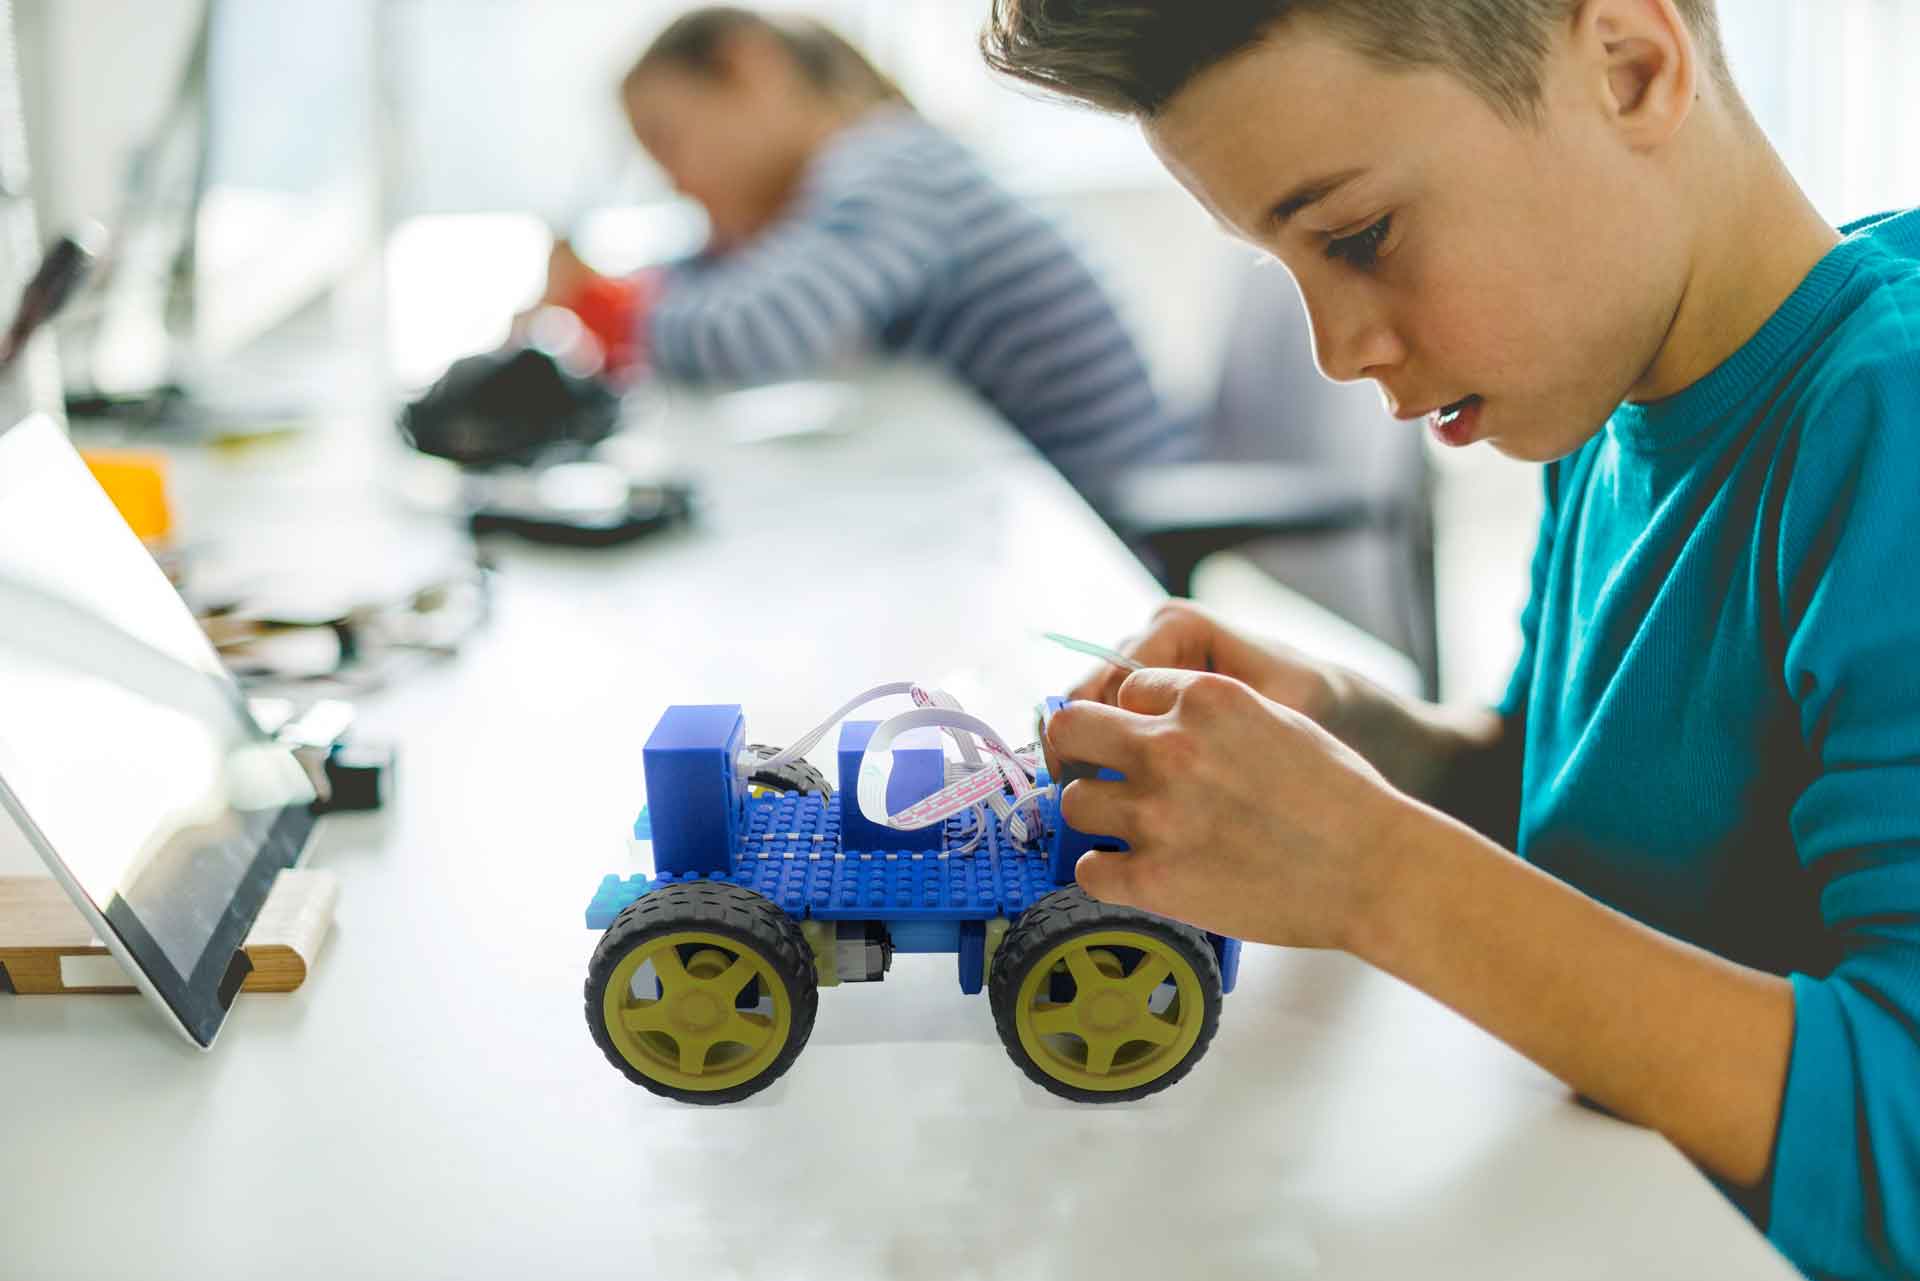 Smart Kiddo Robotic camps: ‘Gamifying’ Education with fun cool camps